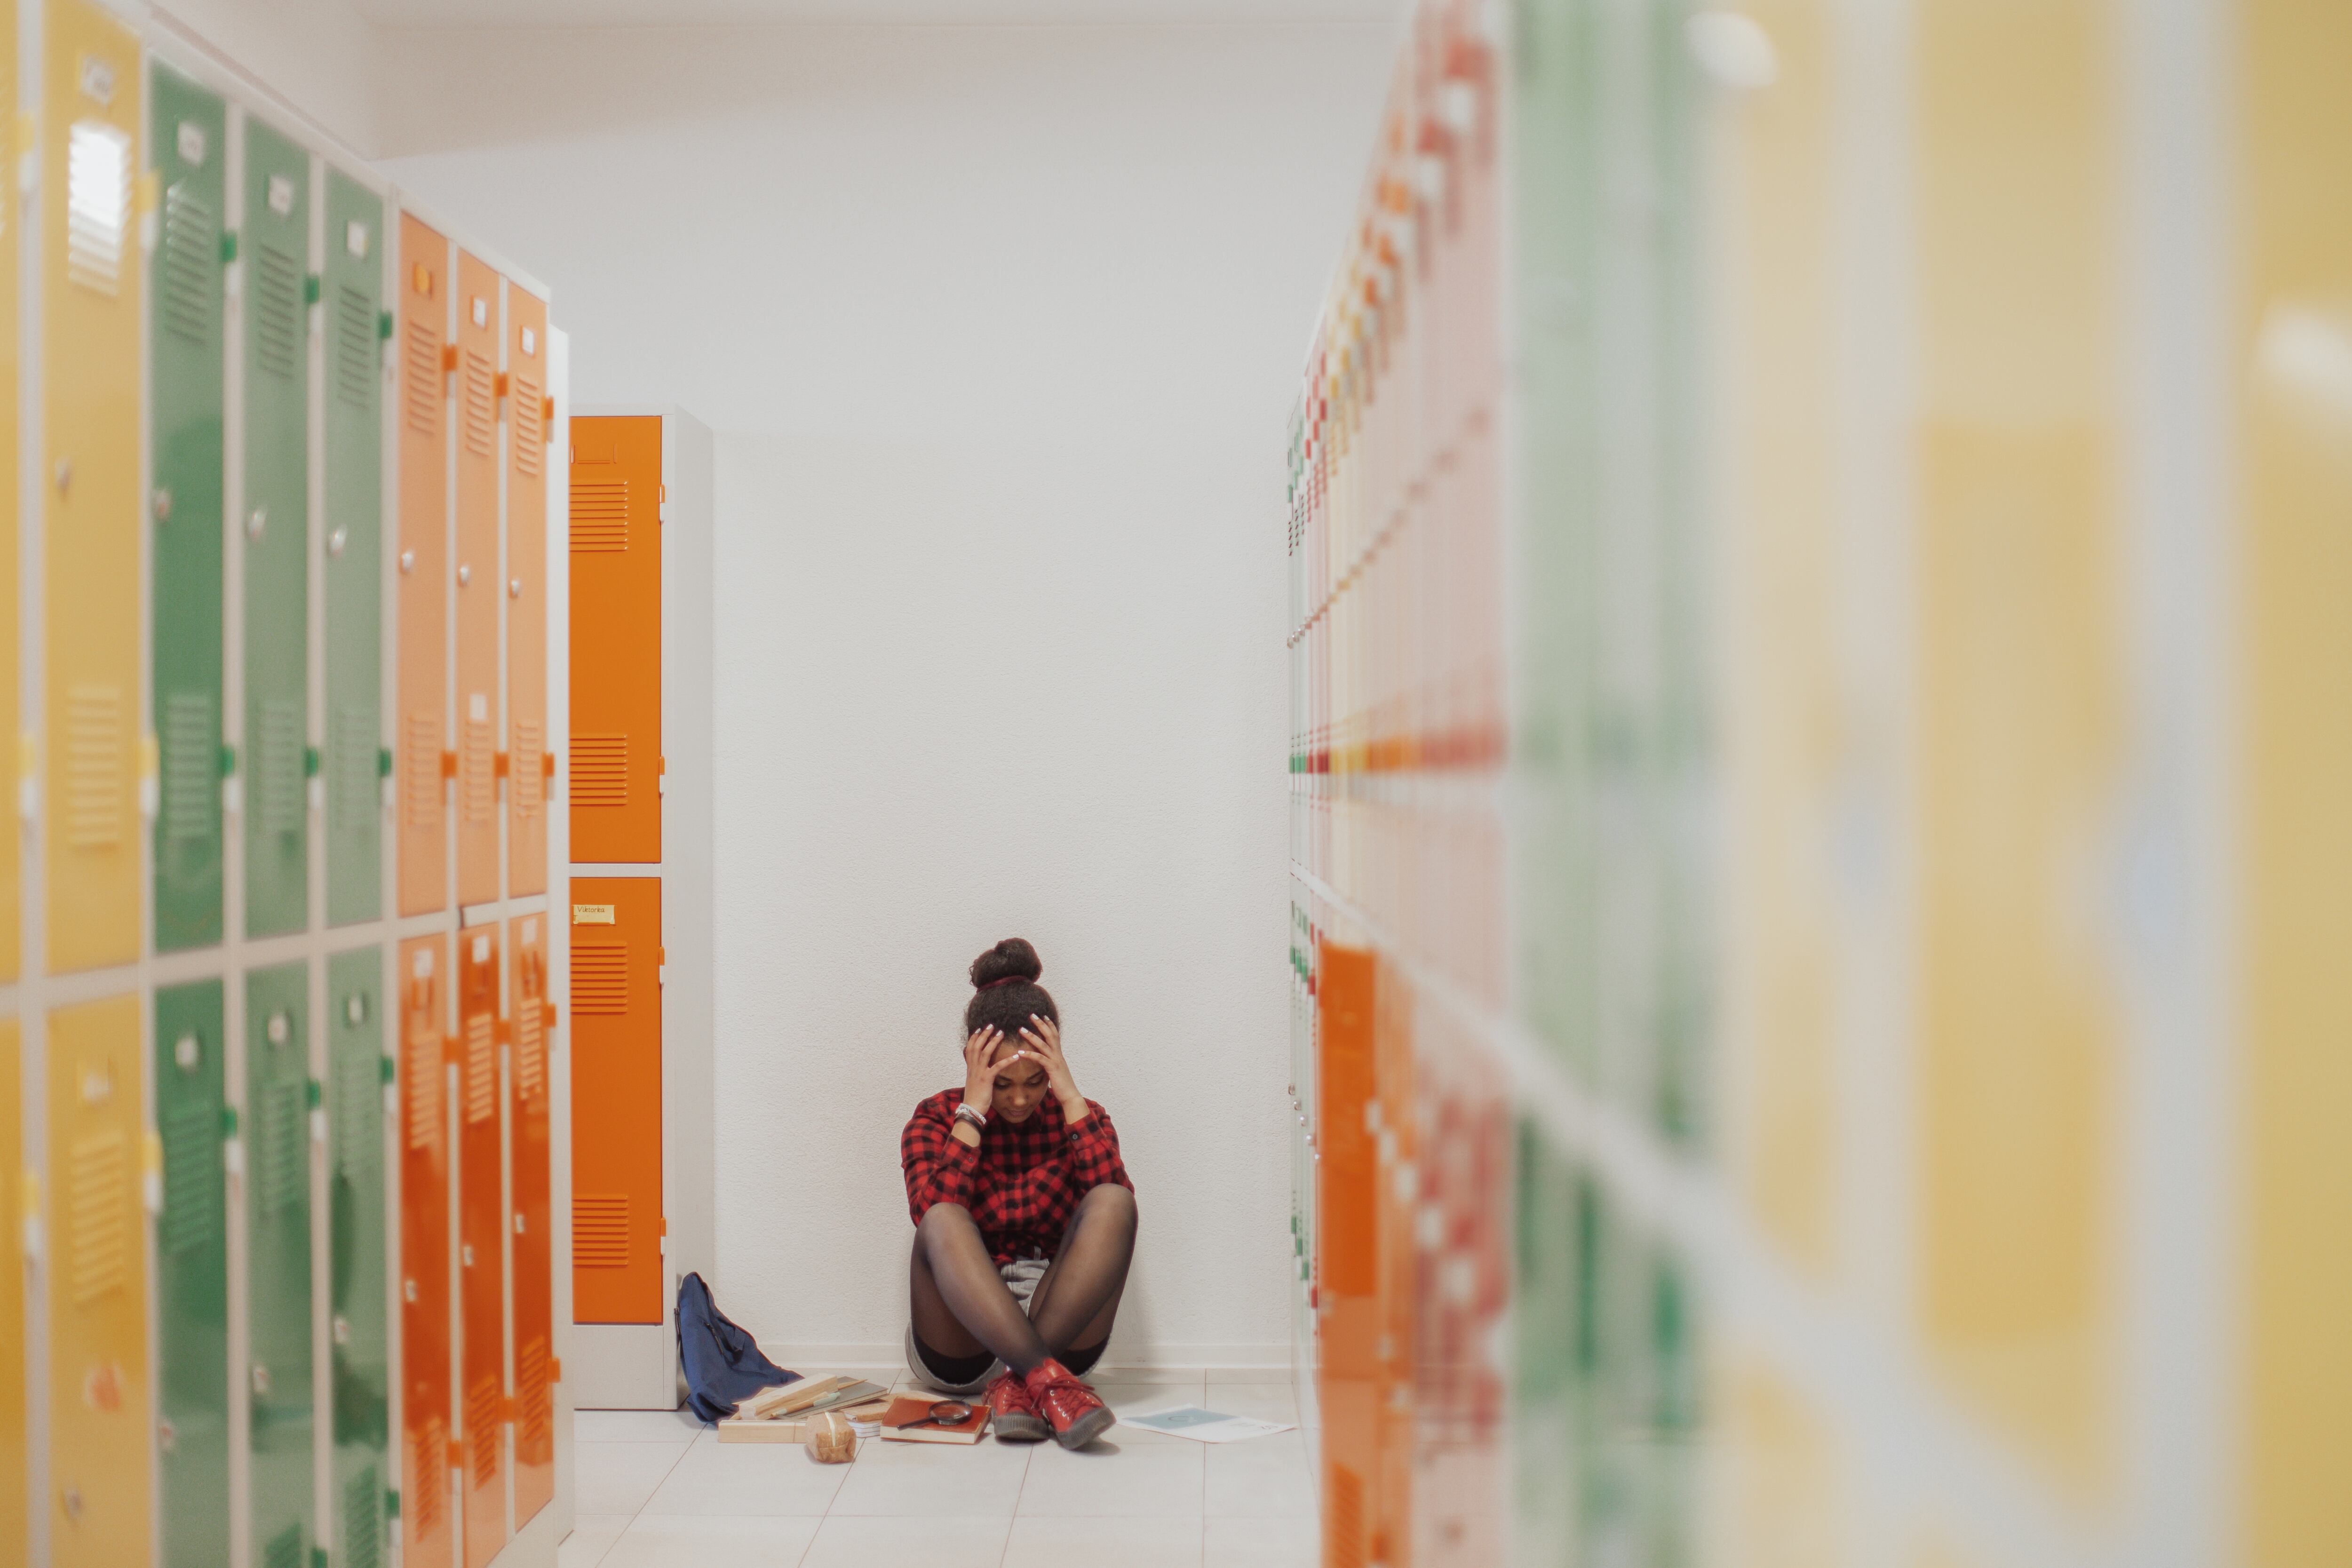 A high school girl sits with her hands covering her face on the floor of a hallway with colorful lockers on both sides.